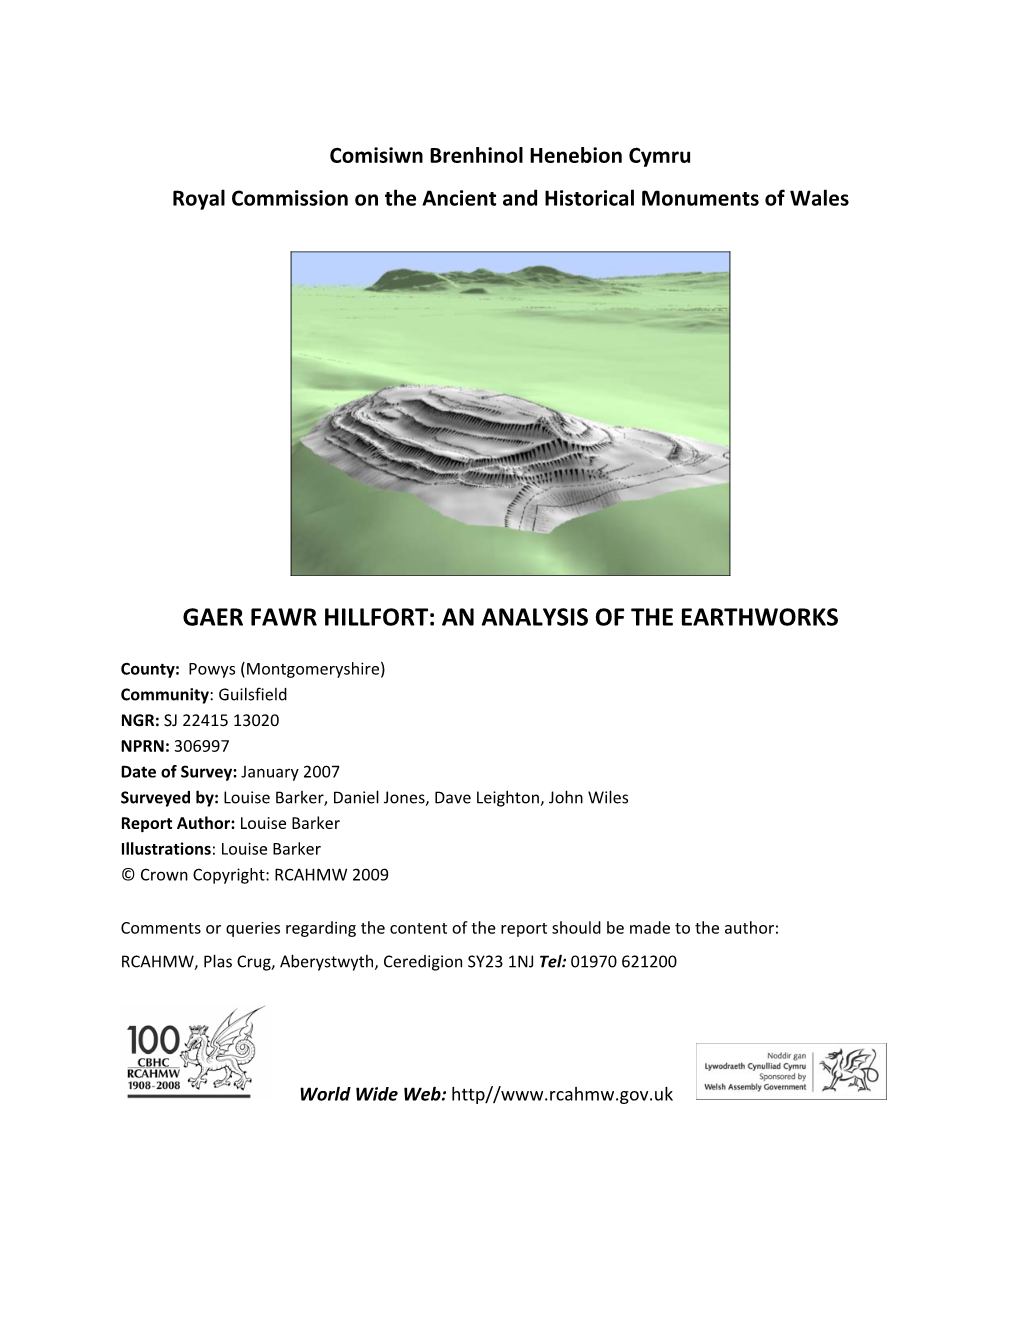 Gaer Fawr Hillfort: an Analysis of the Earthworks